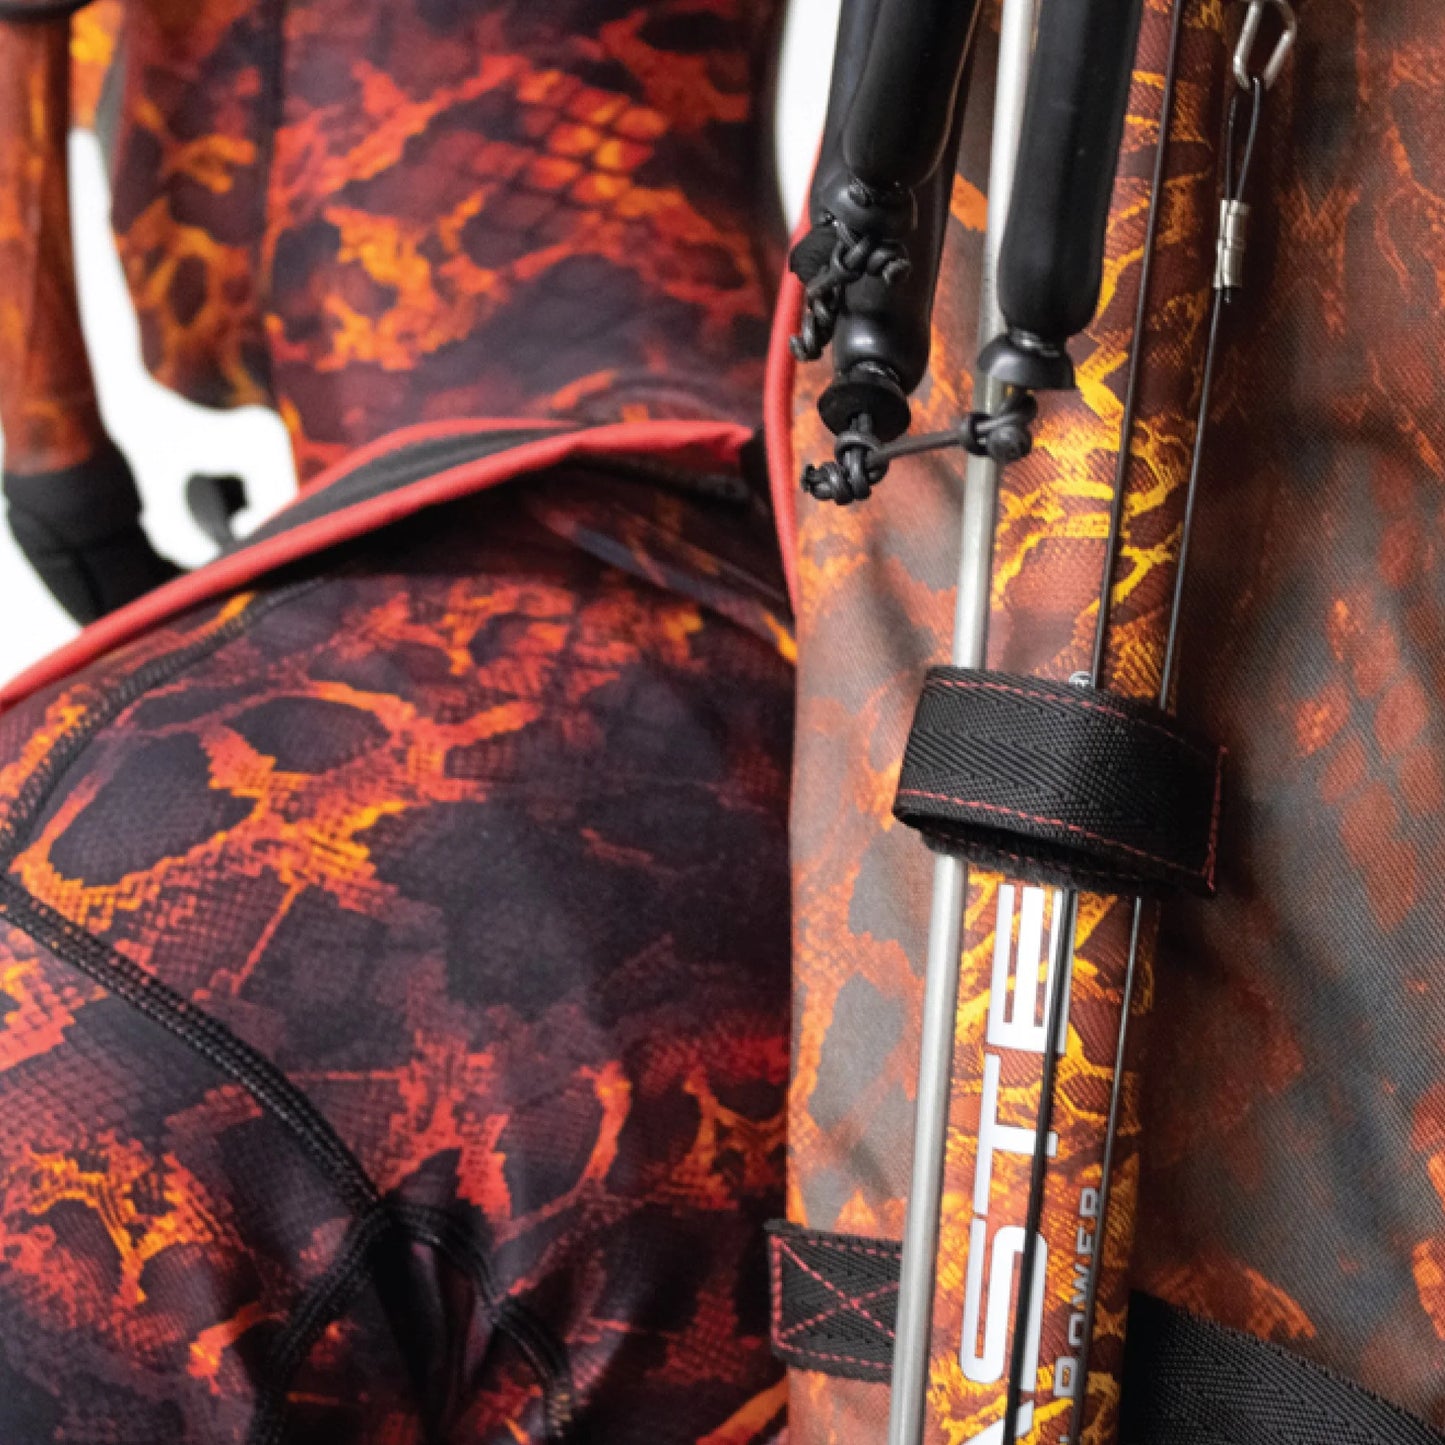 Hunt Master Artillery Spearfishing Free Diving Bag - Camo or Plain